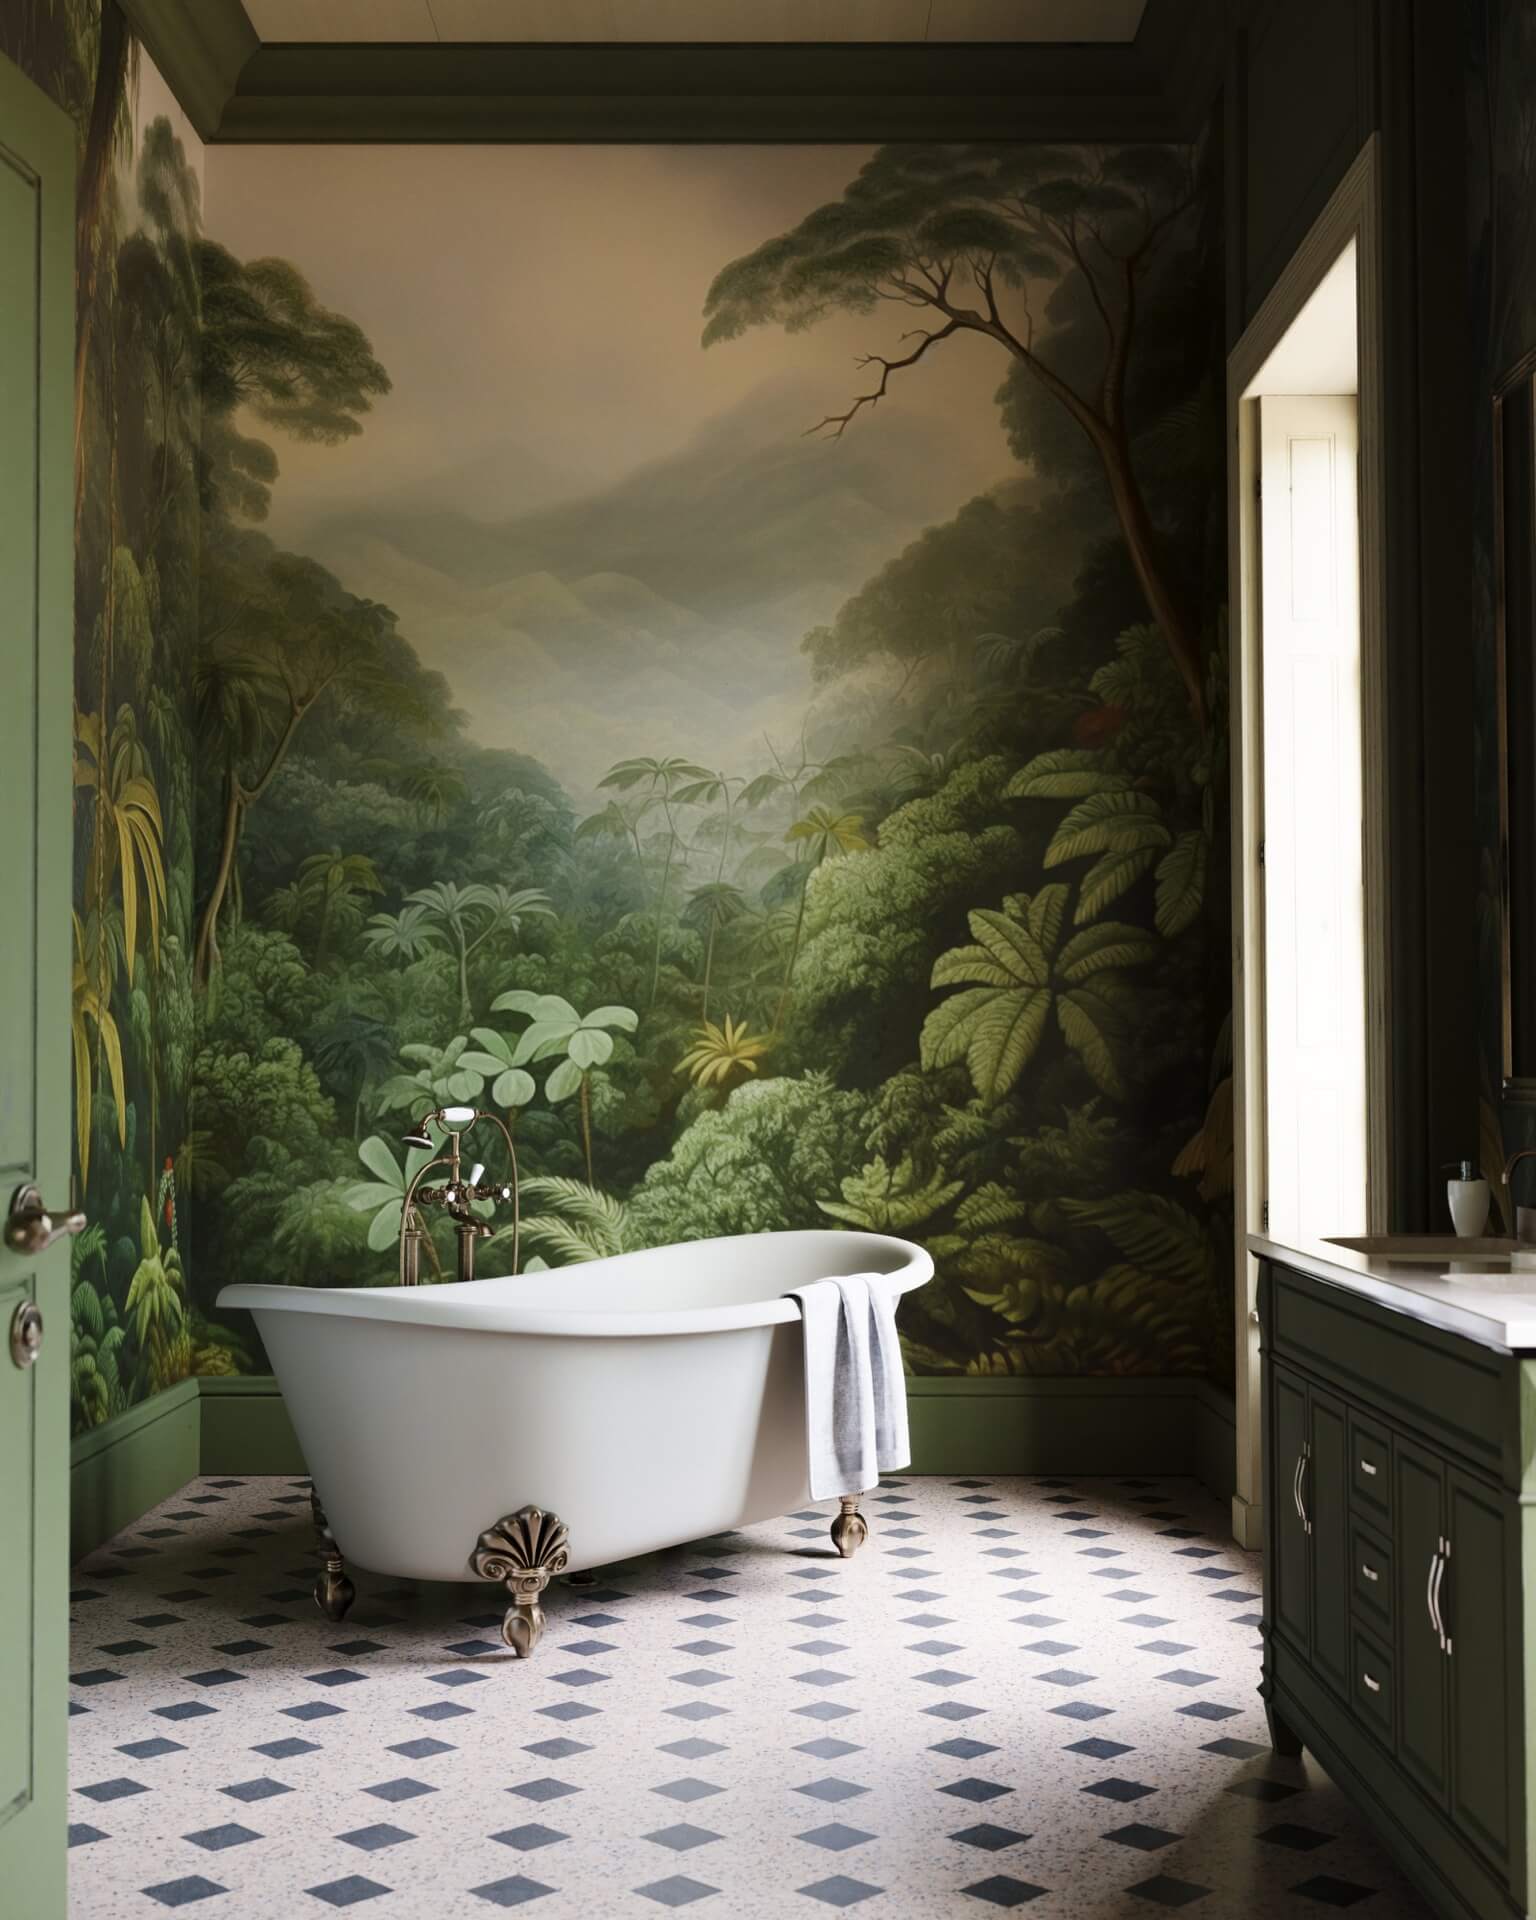 15 of the best independent wallpaper brands 